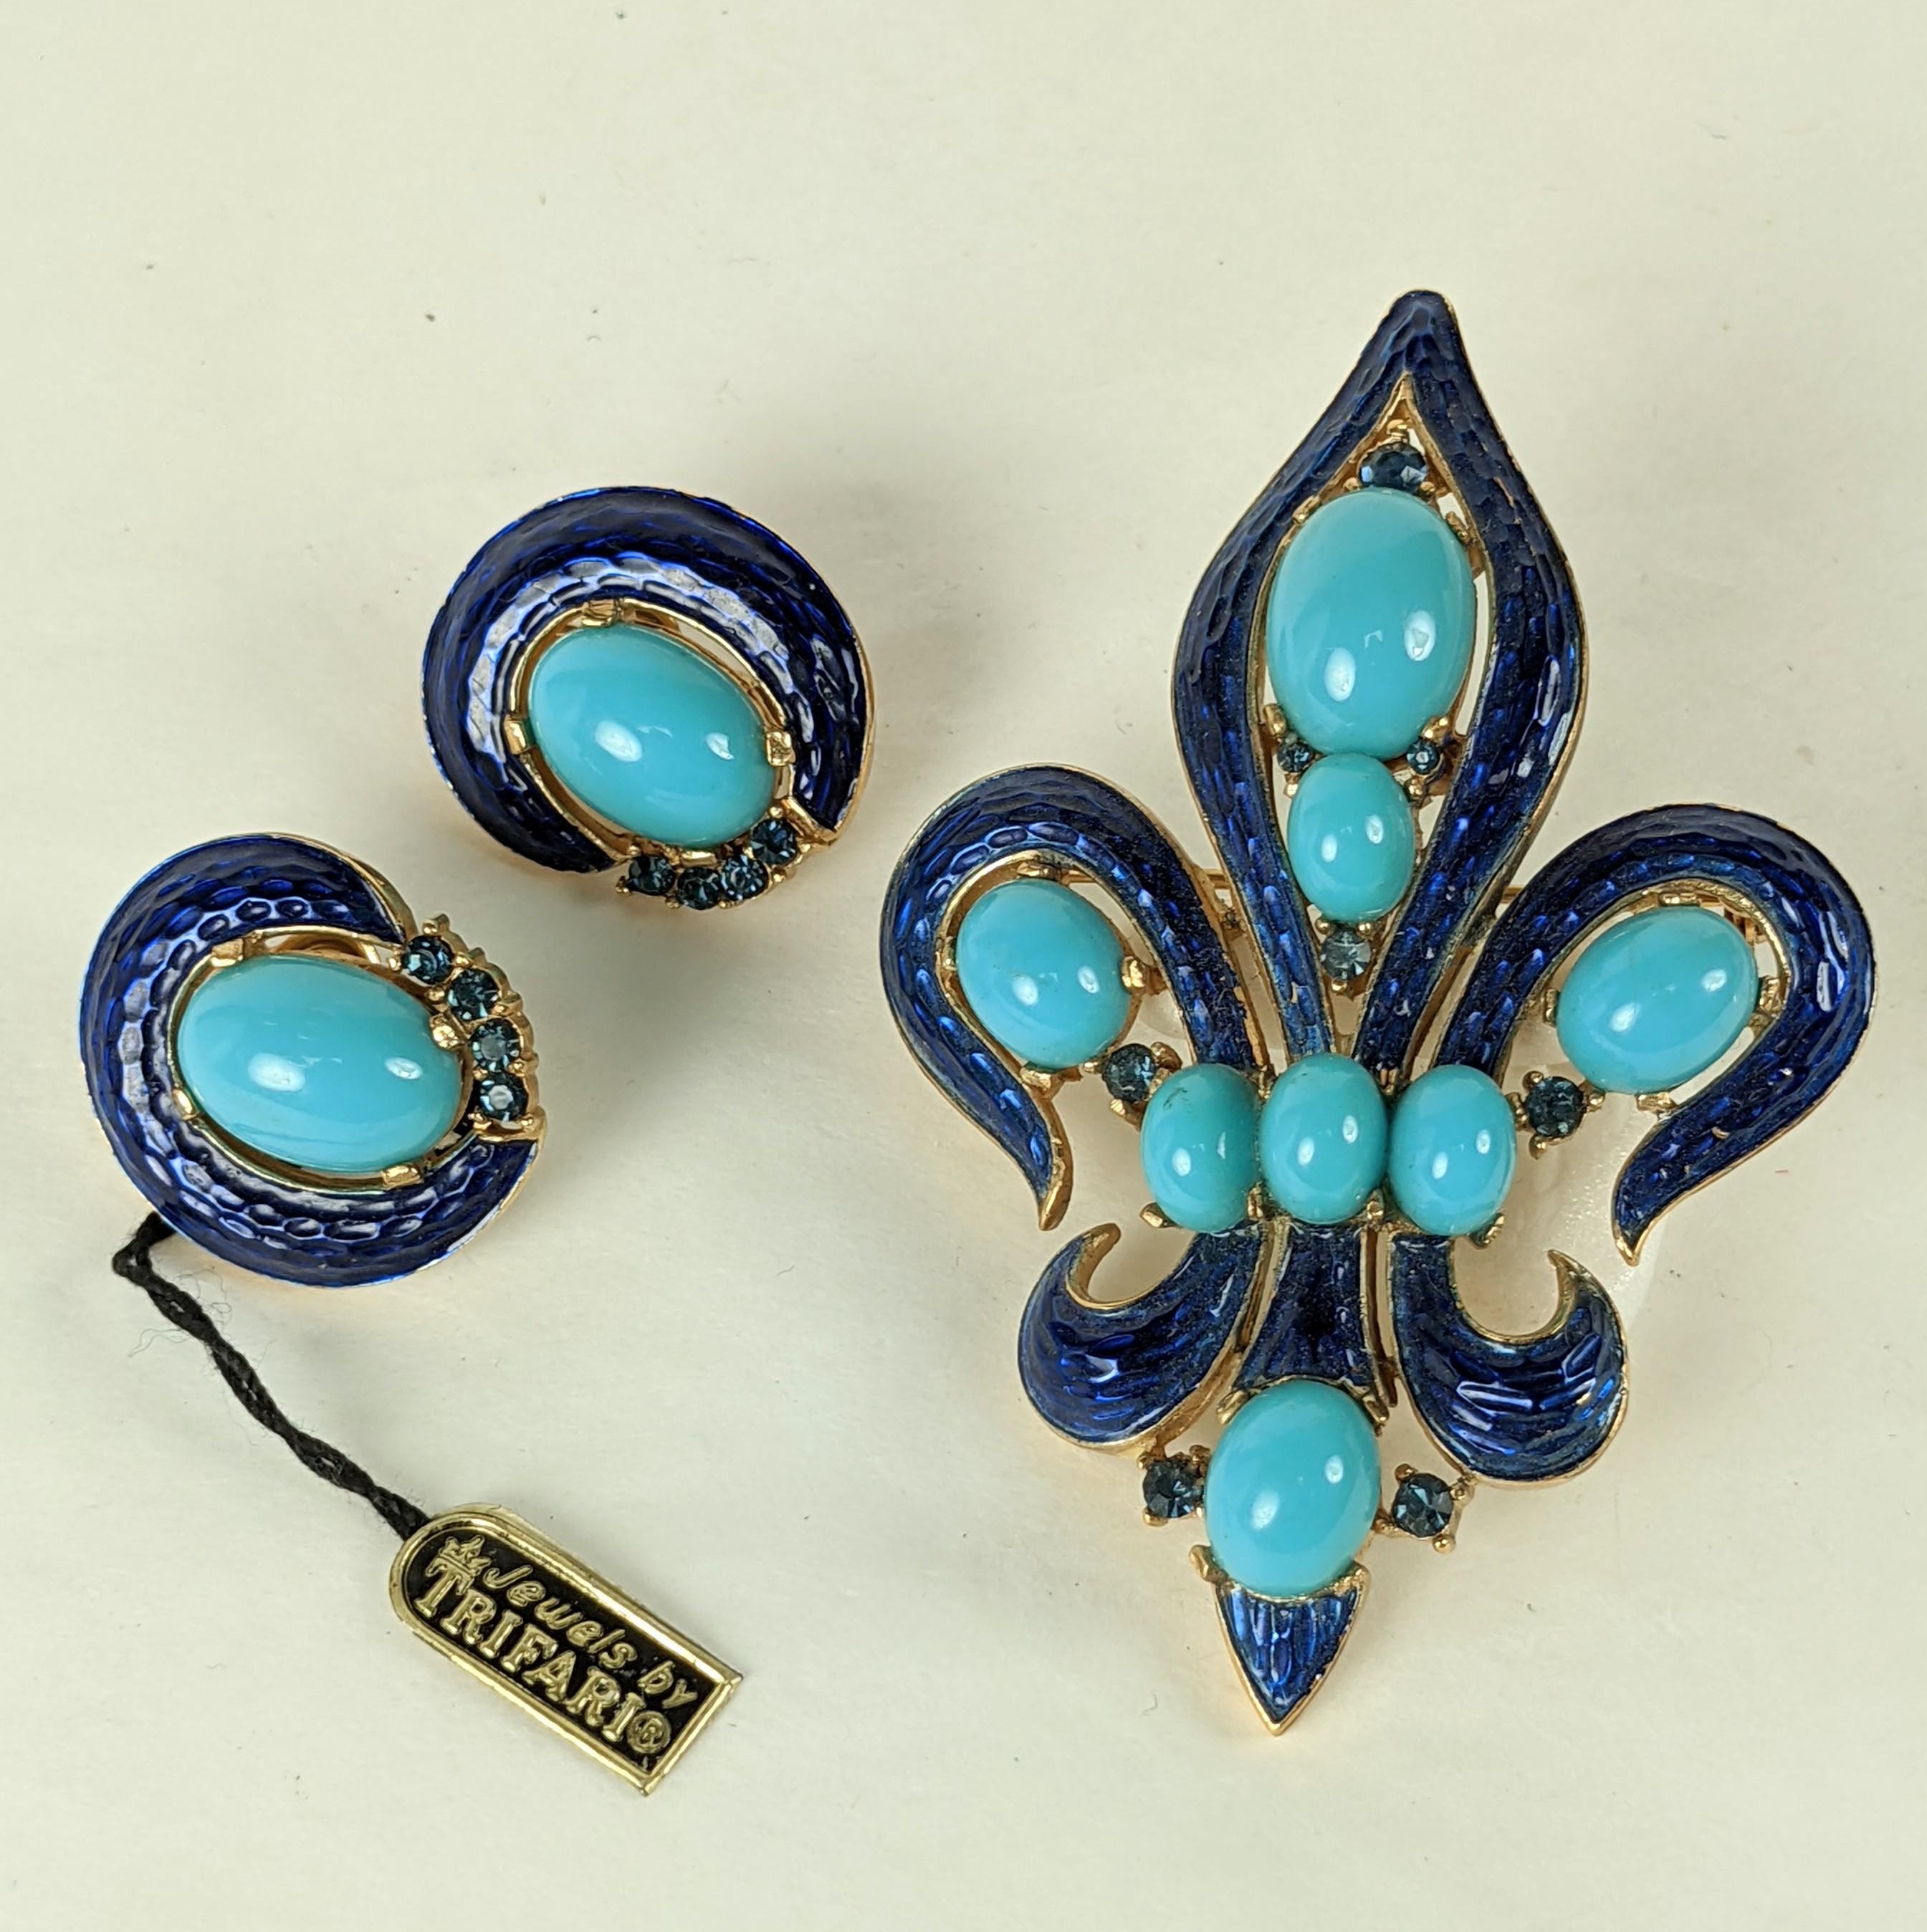 Trifari Enamel Fleur de Lis Set from the 1960's. Faux turquoise cabs are contrasted with vibrant deep sapphire enamel and pastes. Brooch 3